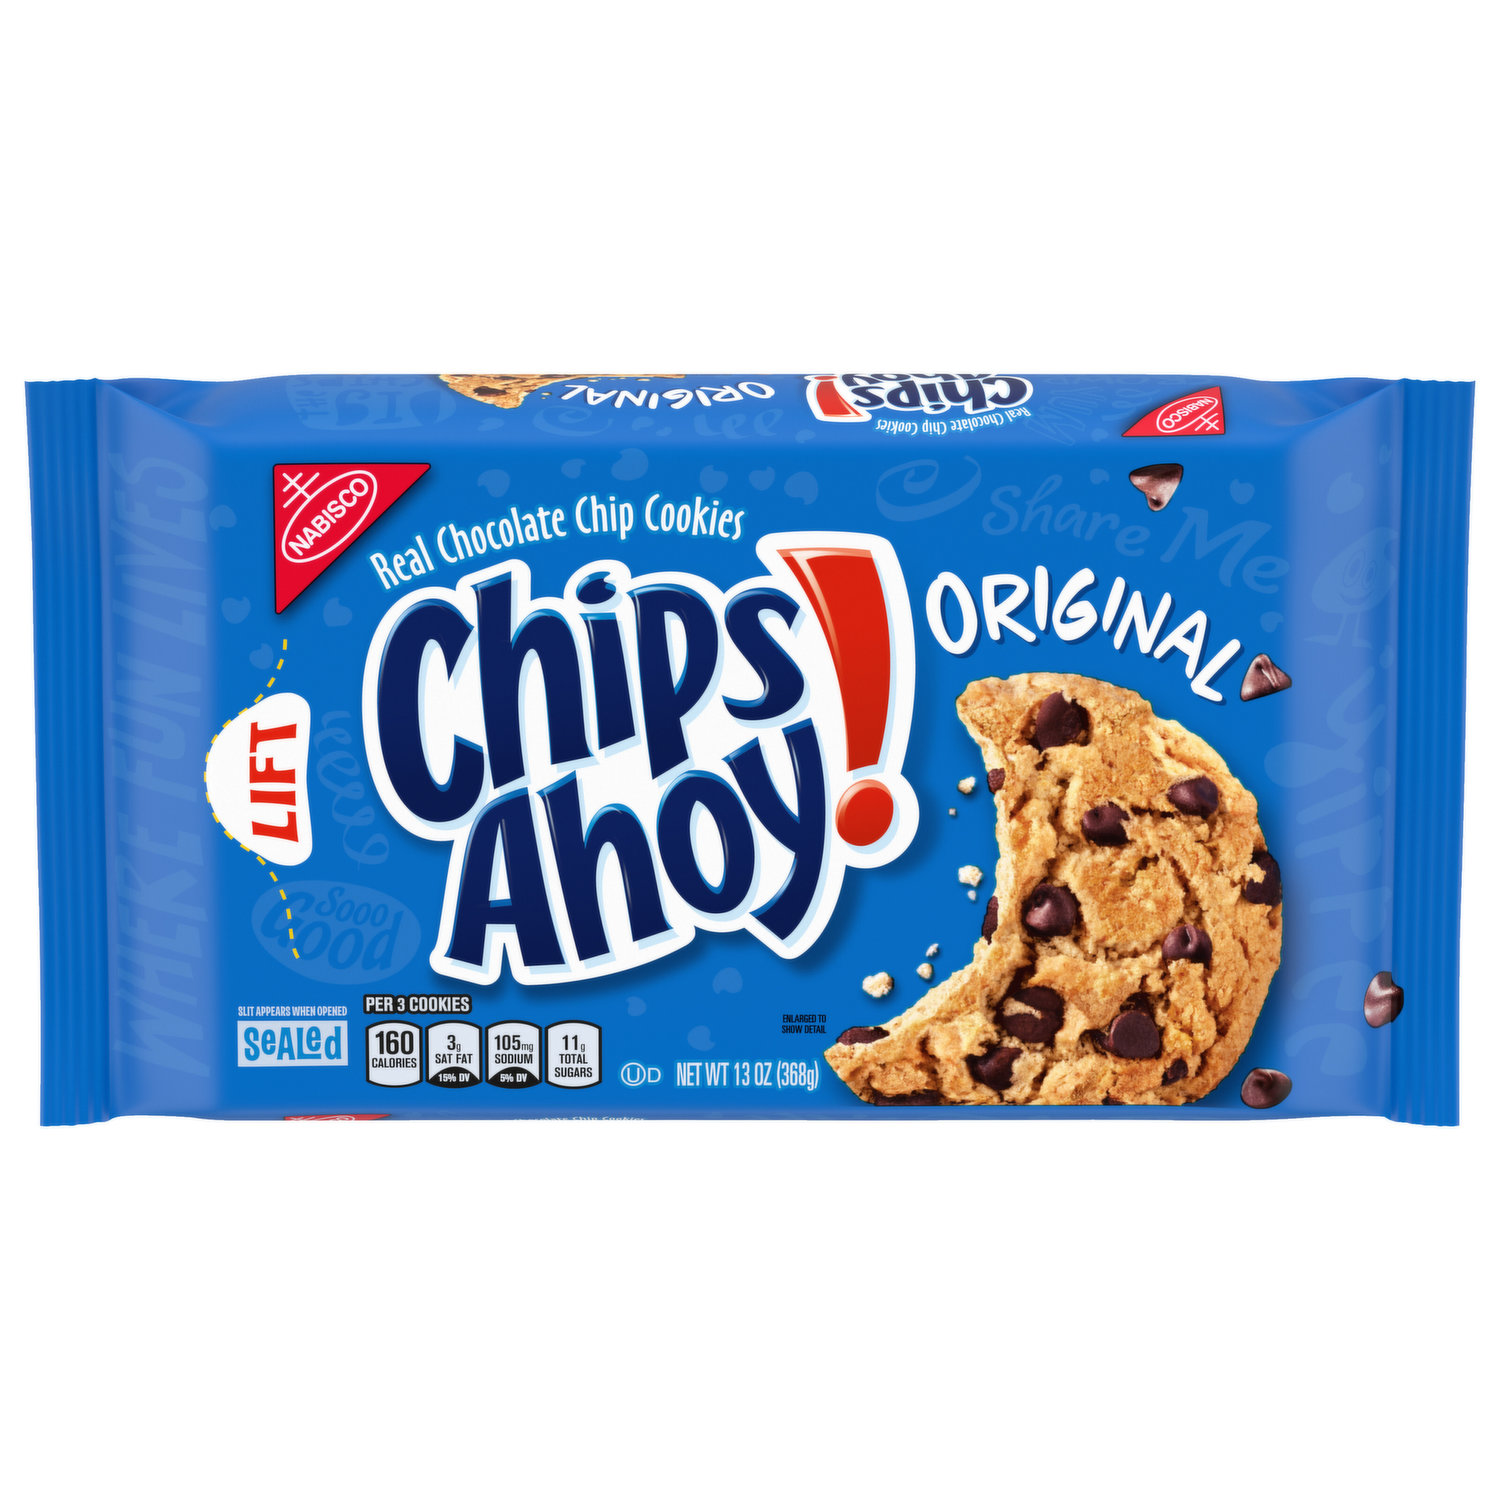 CHIPS AHOY! Original Chocolate Chip Cookies Party Size 25.3 oz